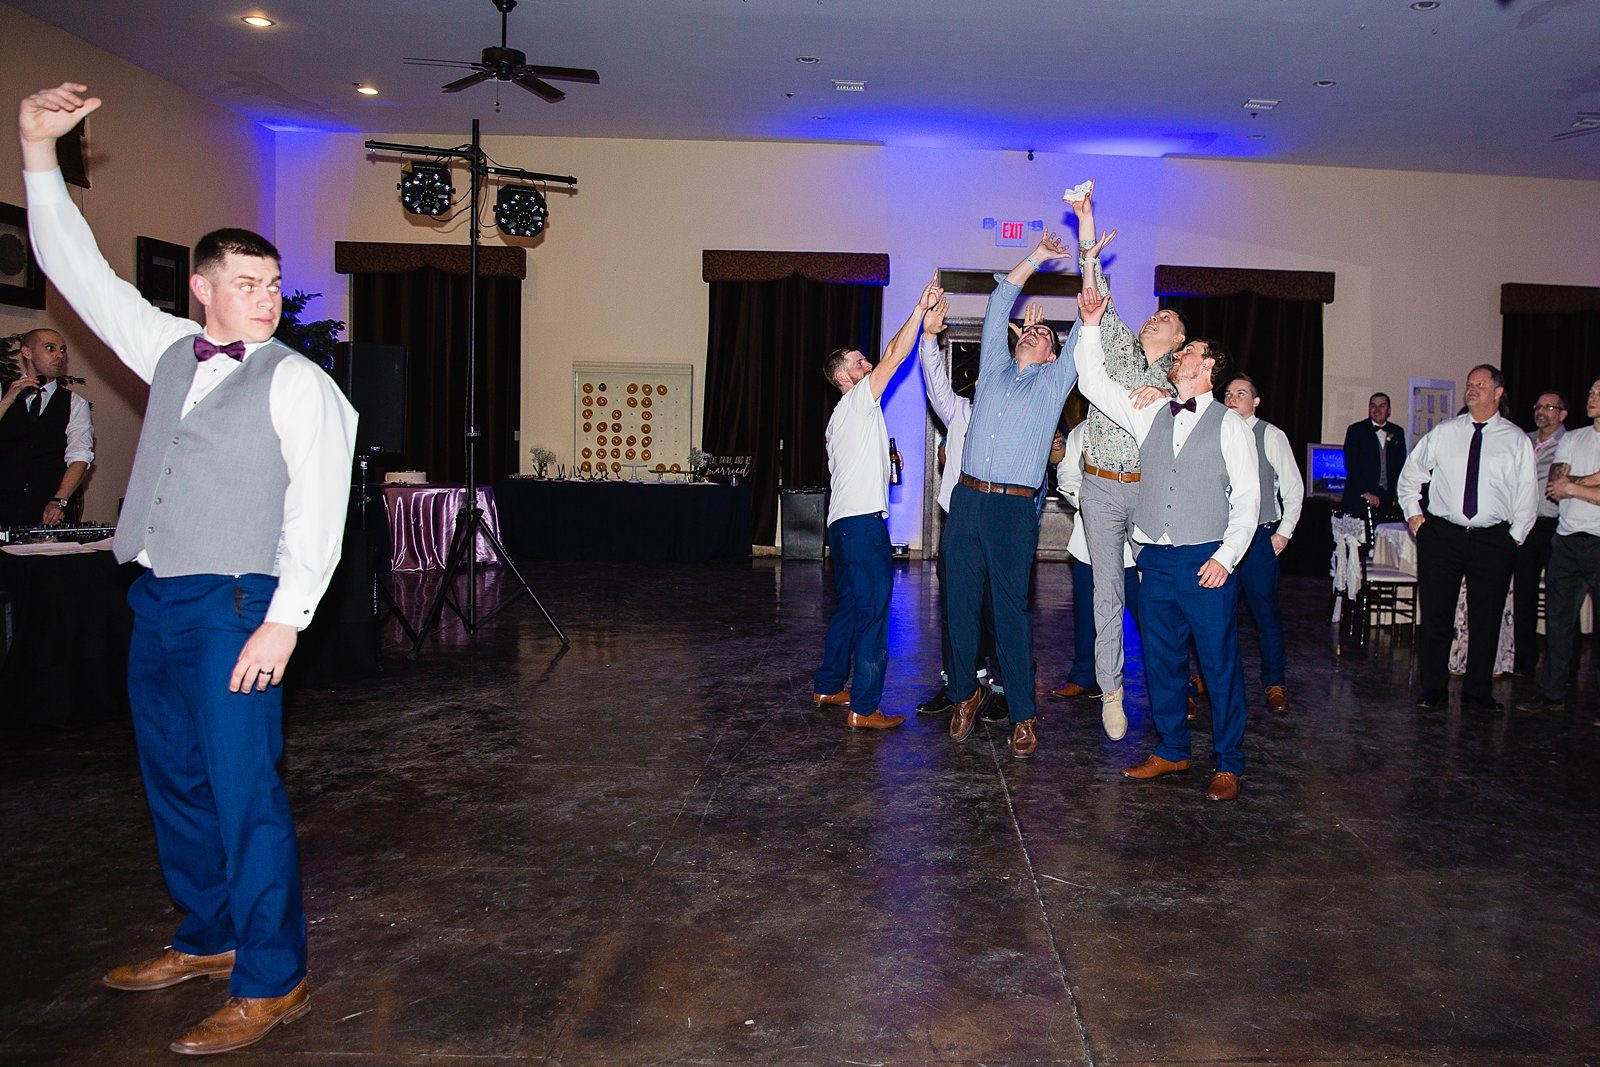 Garter toss at Superstition Manor wedding reception by Mesa wedding photographer PMA Photography.